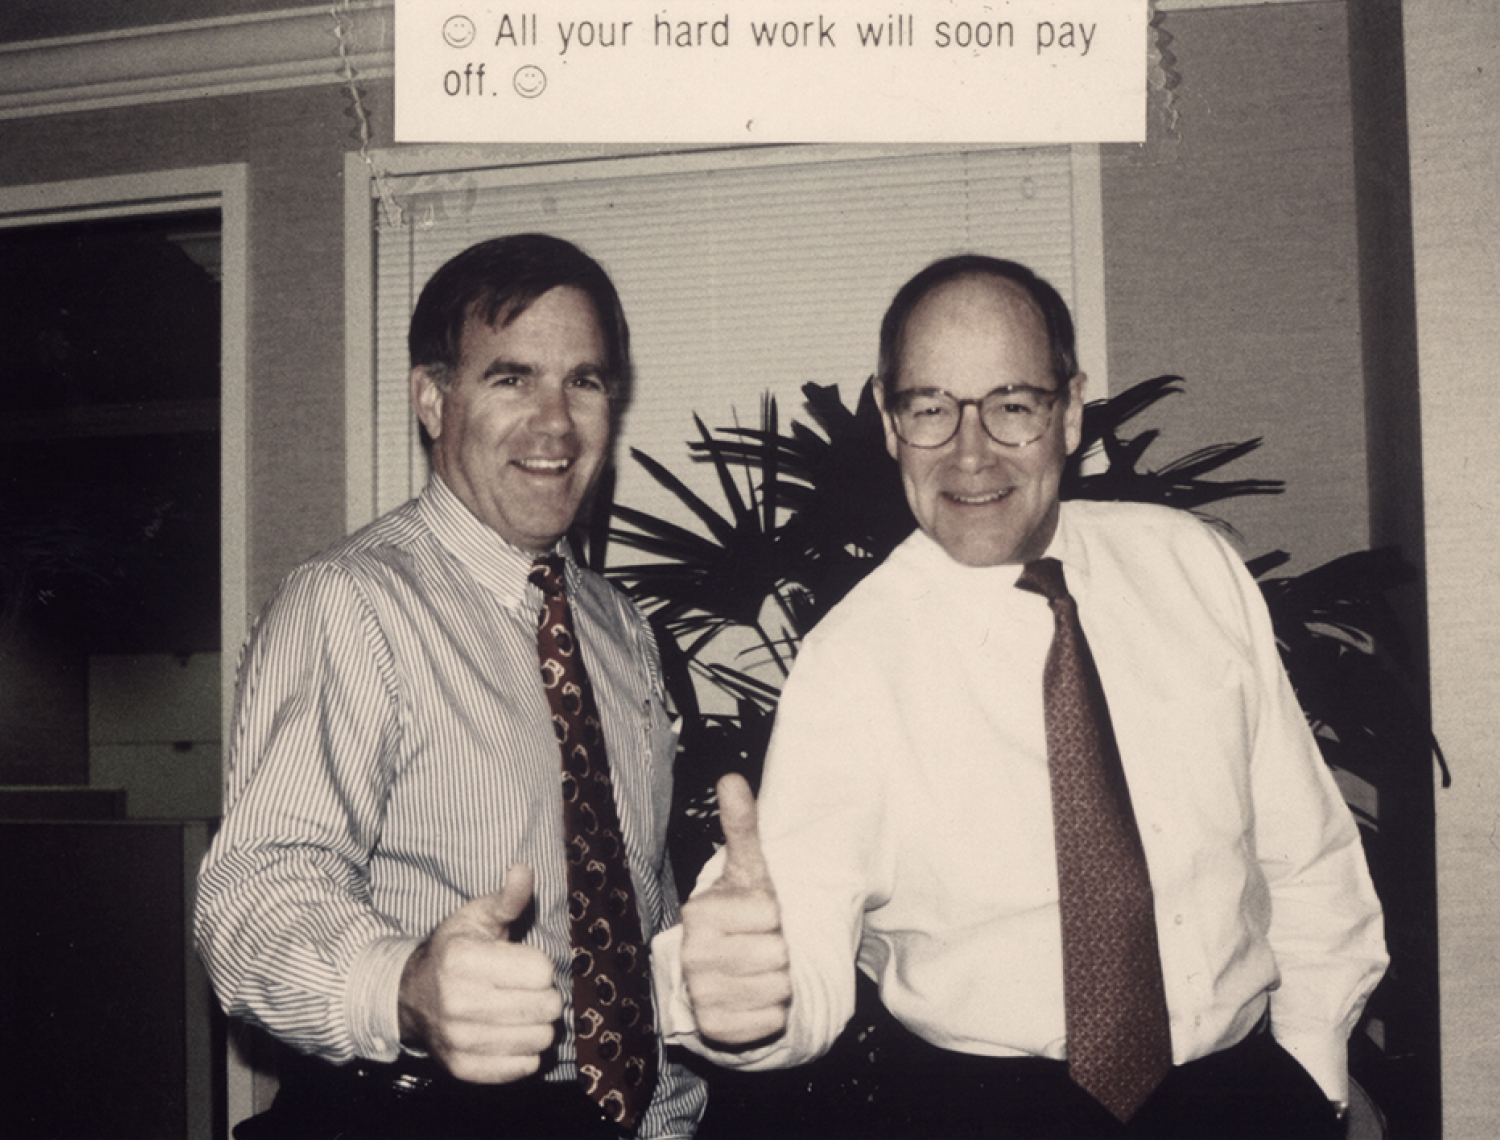 Photo of  the Dreyer's in 1977 giving a thumbs up and cookie forture saying "All your hard work will soon pay off".